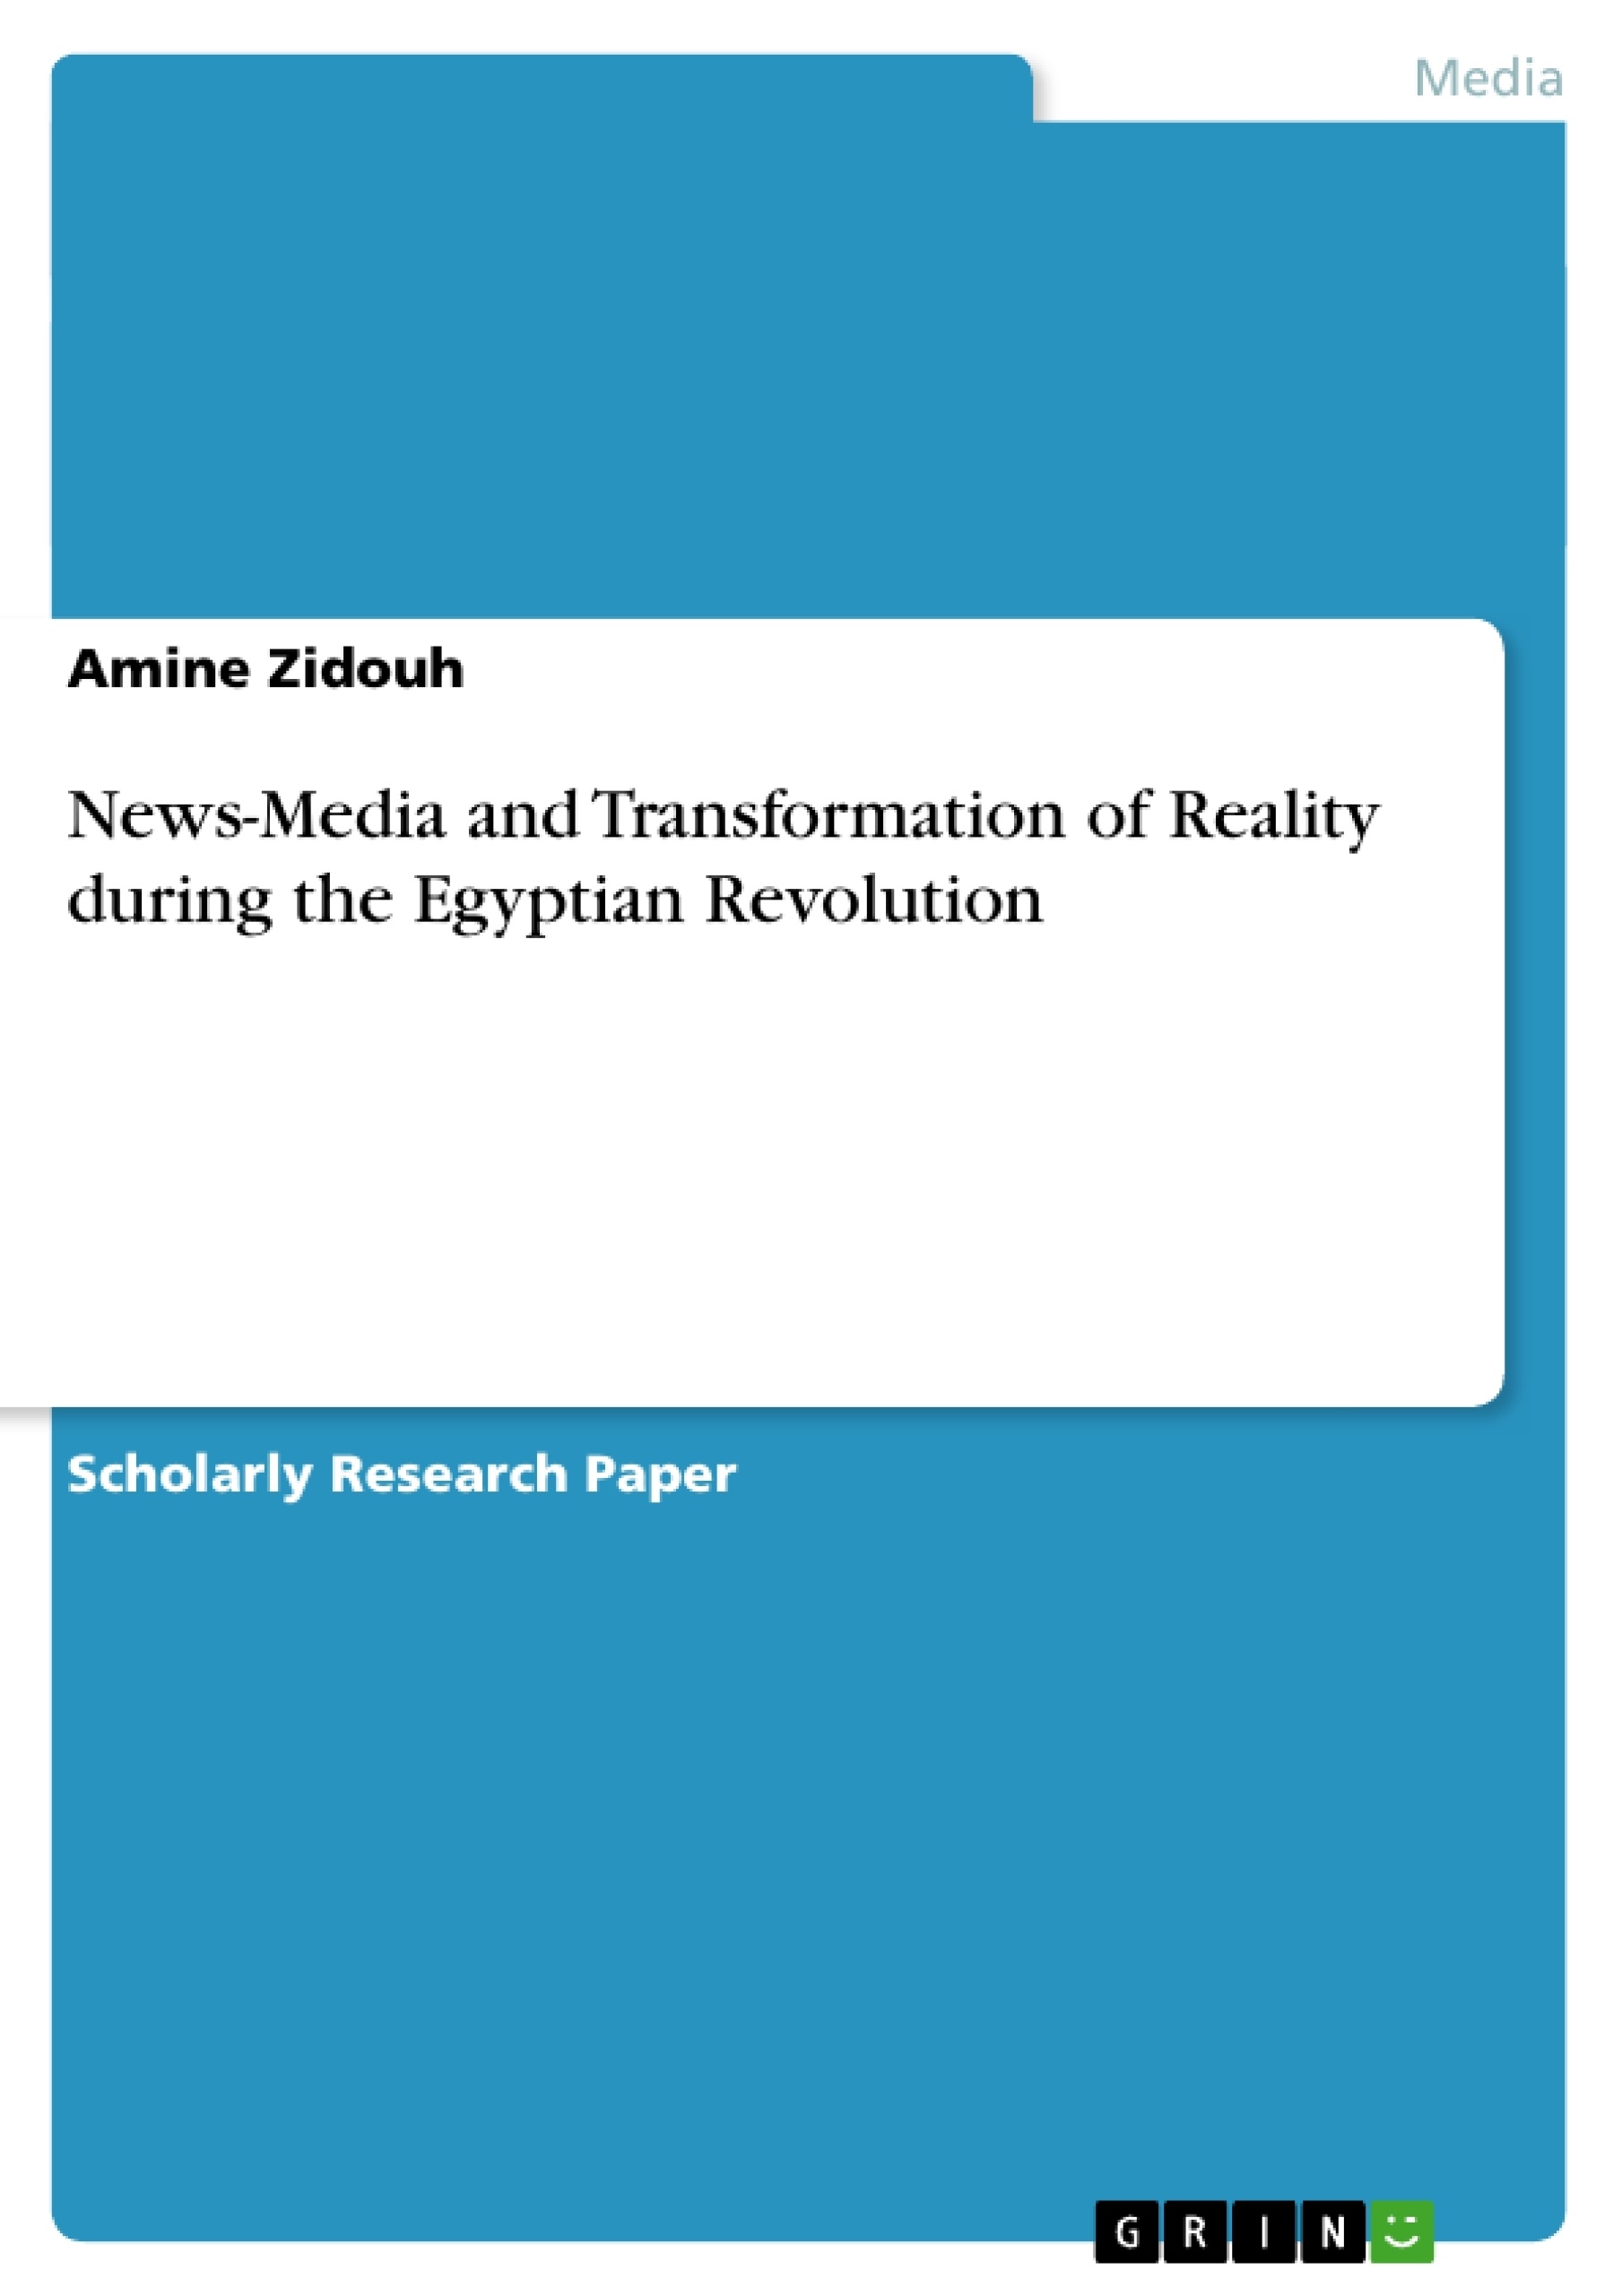 Title: News-Media and Transformation of Reality during the Egyptian Revolution